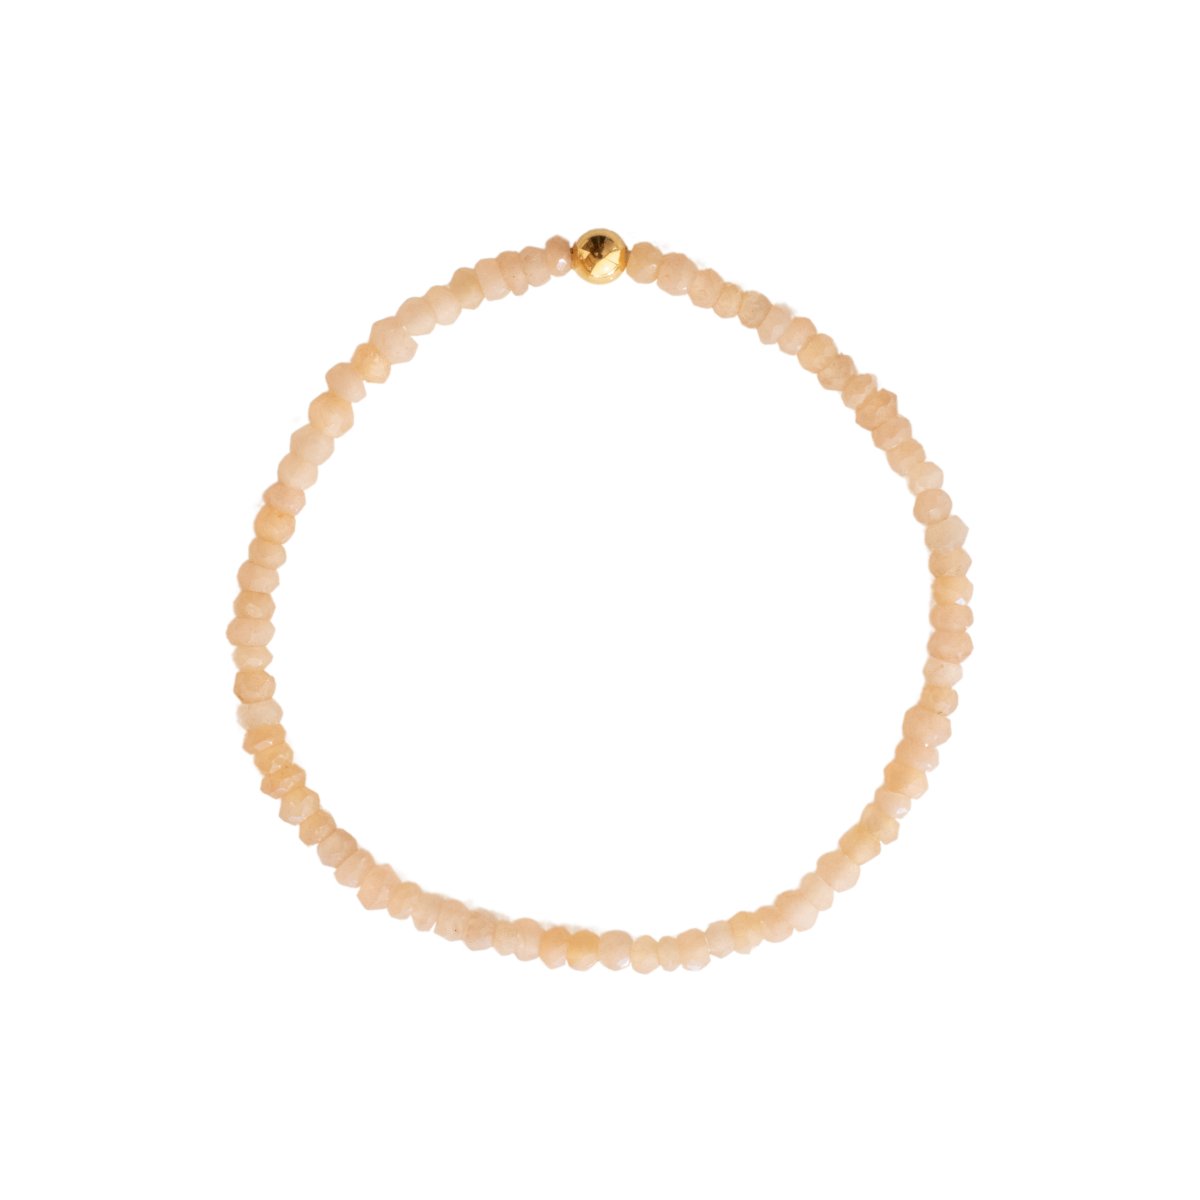 ICONIC BEADED STRETCH BRACELET - PEACH MOONSTONE & GOLD - SO PRETTY CARA COTTER